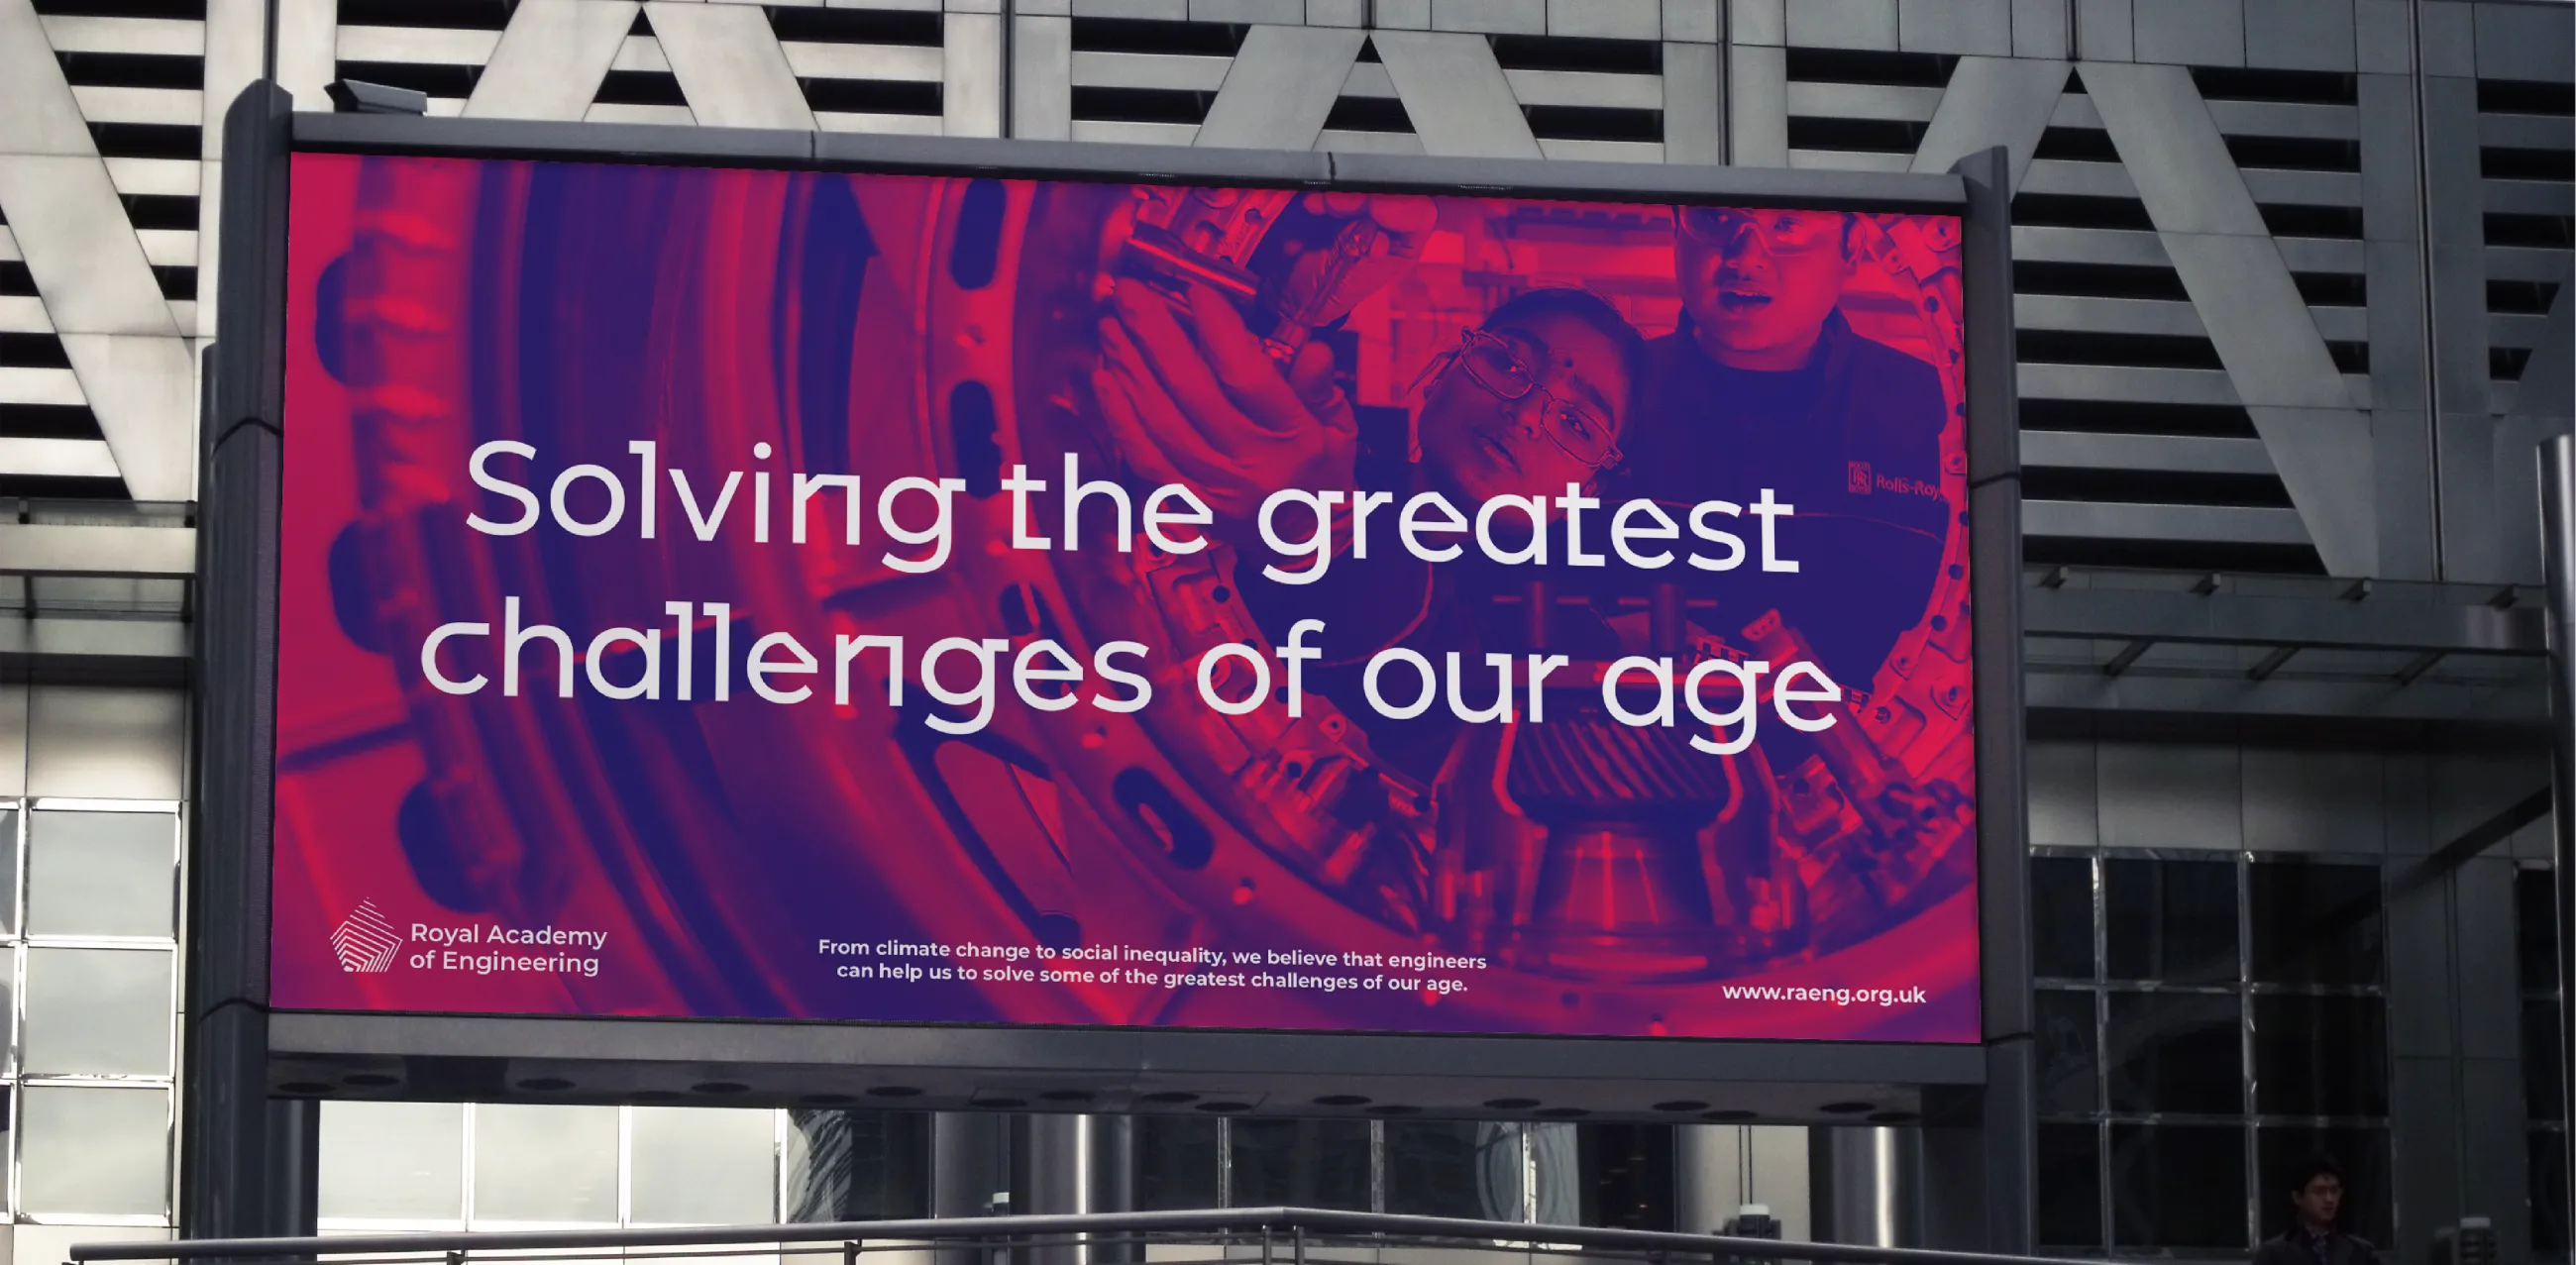 Billboard shows "Solving the greatest challenges of our age" – Royal Academy of Engineering